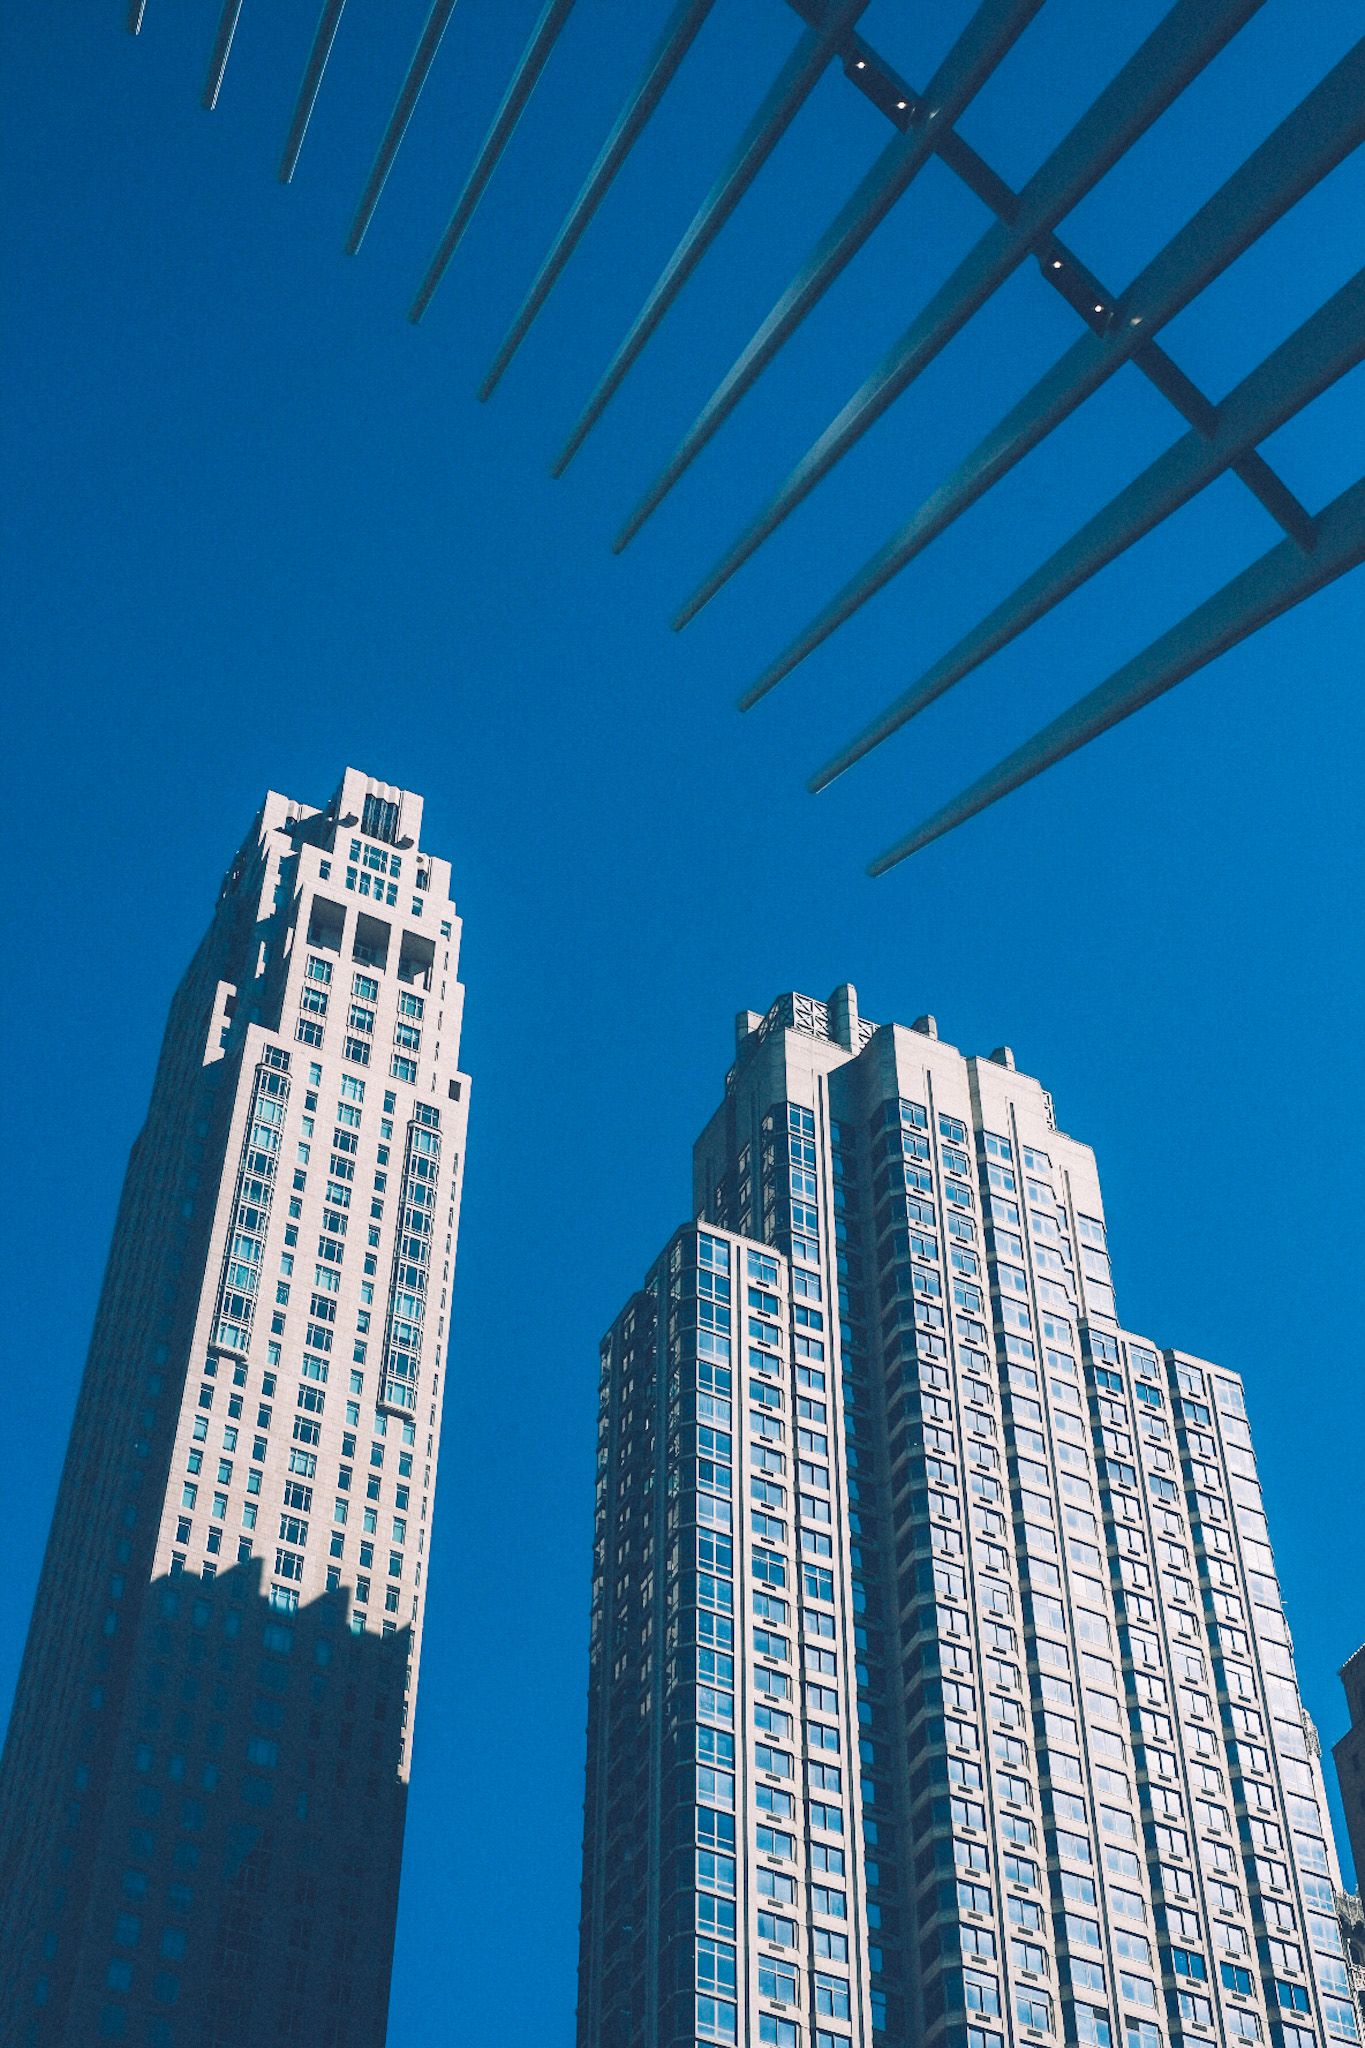 Two buildings rise up from a blue sky while spikes of an unknown origin emerge from the top right corner.